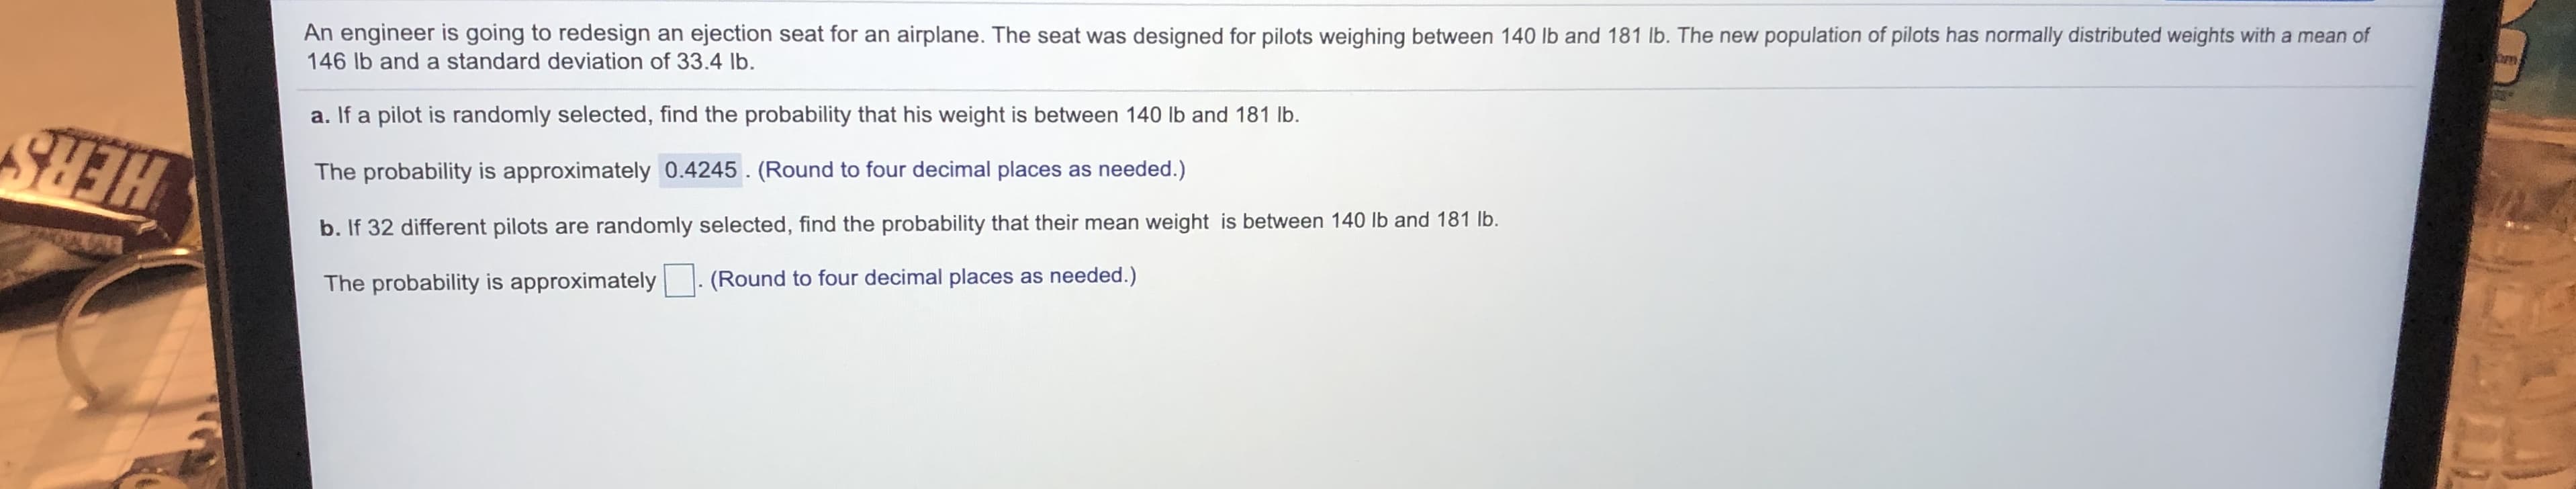 An engineer is going to redesign an ejection seat for an airplane. The seat was designed for pilots weighing between 140 lb and 181 lb. The new population of pilots has normally distributed weights with a mean of
146 lb and a standard deviation of 33.4 lb.
a. If a pilot is randomly selected, find the probability that his weight is between 140 lb and 181 lb.
The probability is approximately 0.4245. (Round to four decimal places as needed.)
b. If 32 different pilots are randomly selected, find the probability that their mean weight is between 140 lb and 181 Ib.
HERS
The probability is approximately
(Round to four decimal places as needed.)
